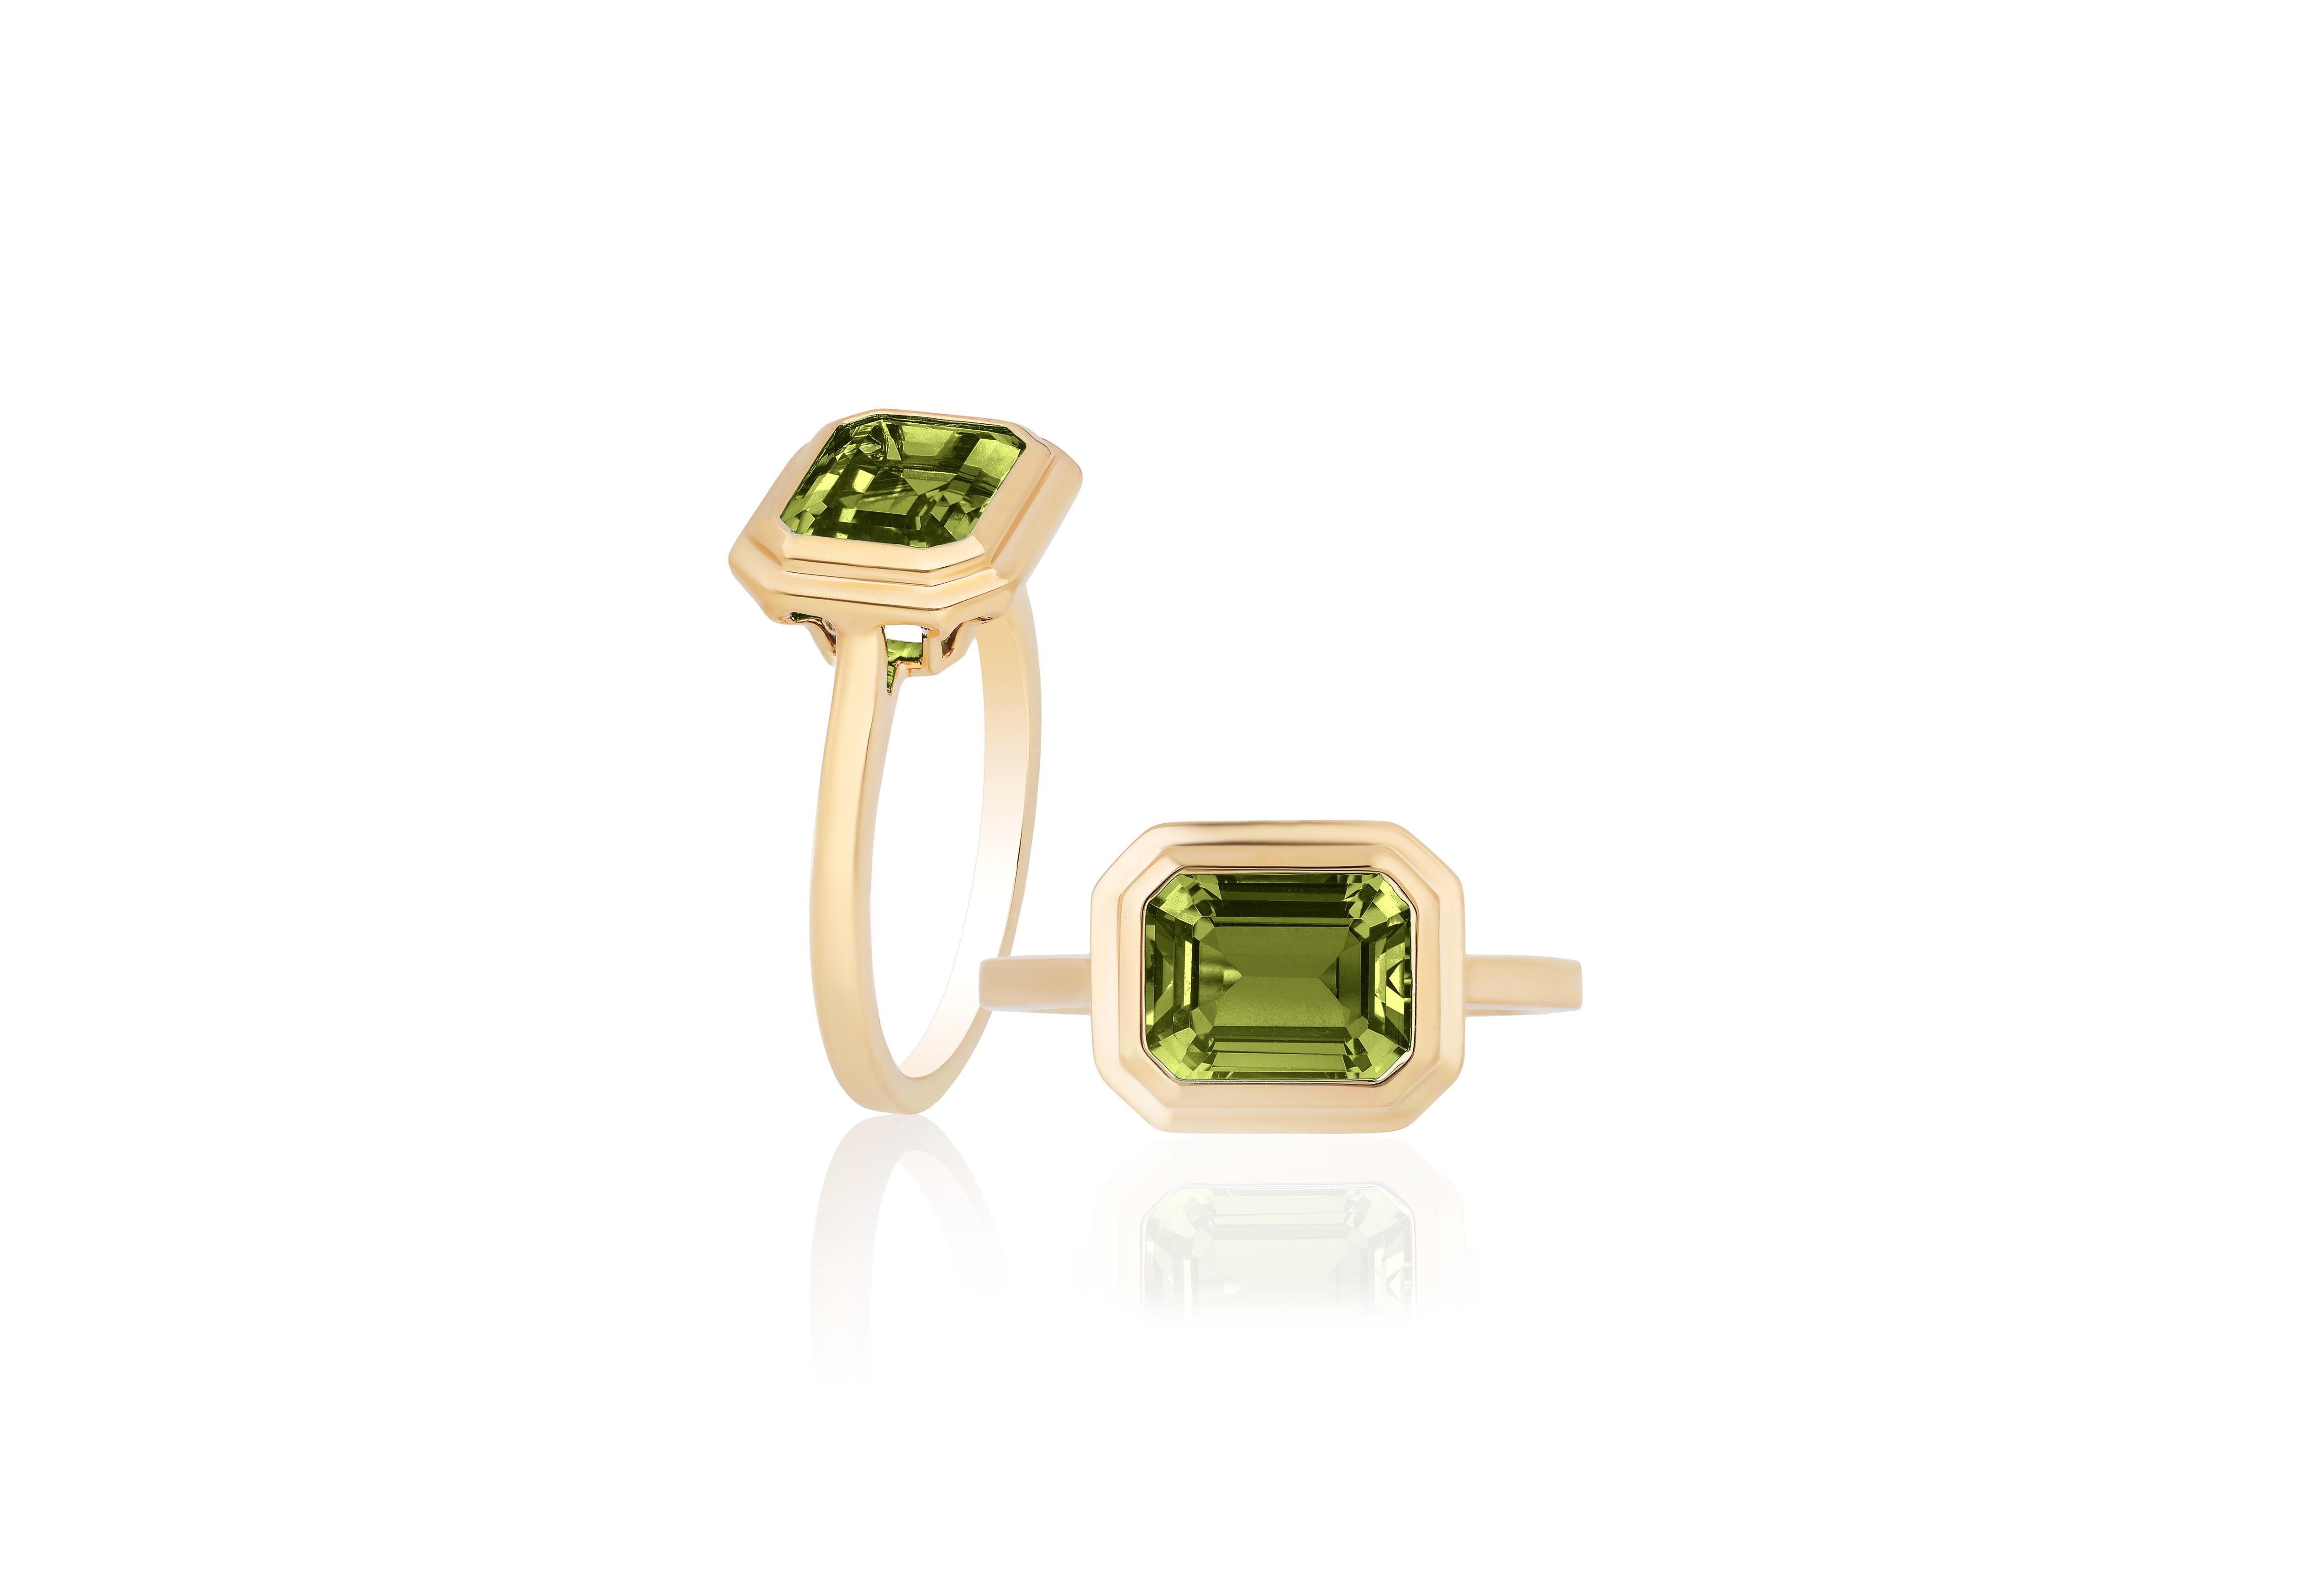 This Peridot Emerald Cut Bezel Set Ring in 18K Yellow Gold is a sleek piece from the 'Manhattan' Collection. It features a stunning emerald-cut Peridot stone set in a 18K yellow gold bezel. This ring embodies modern elegance, offering a touch of